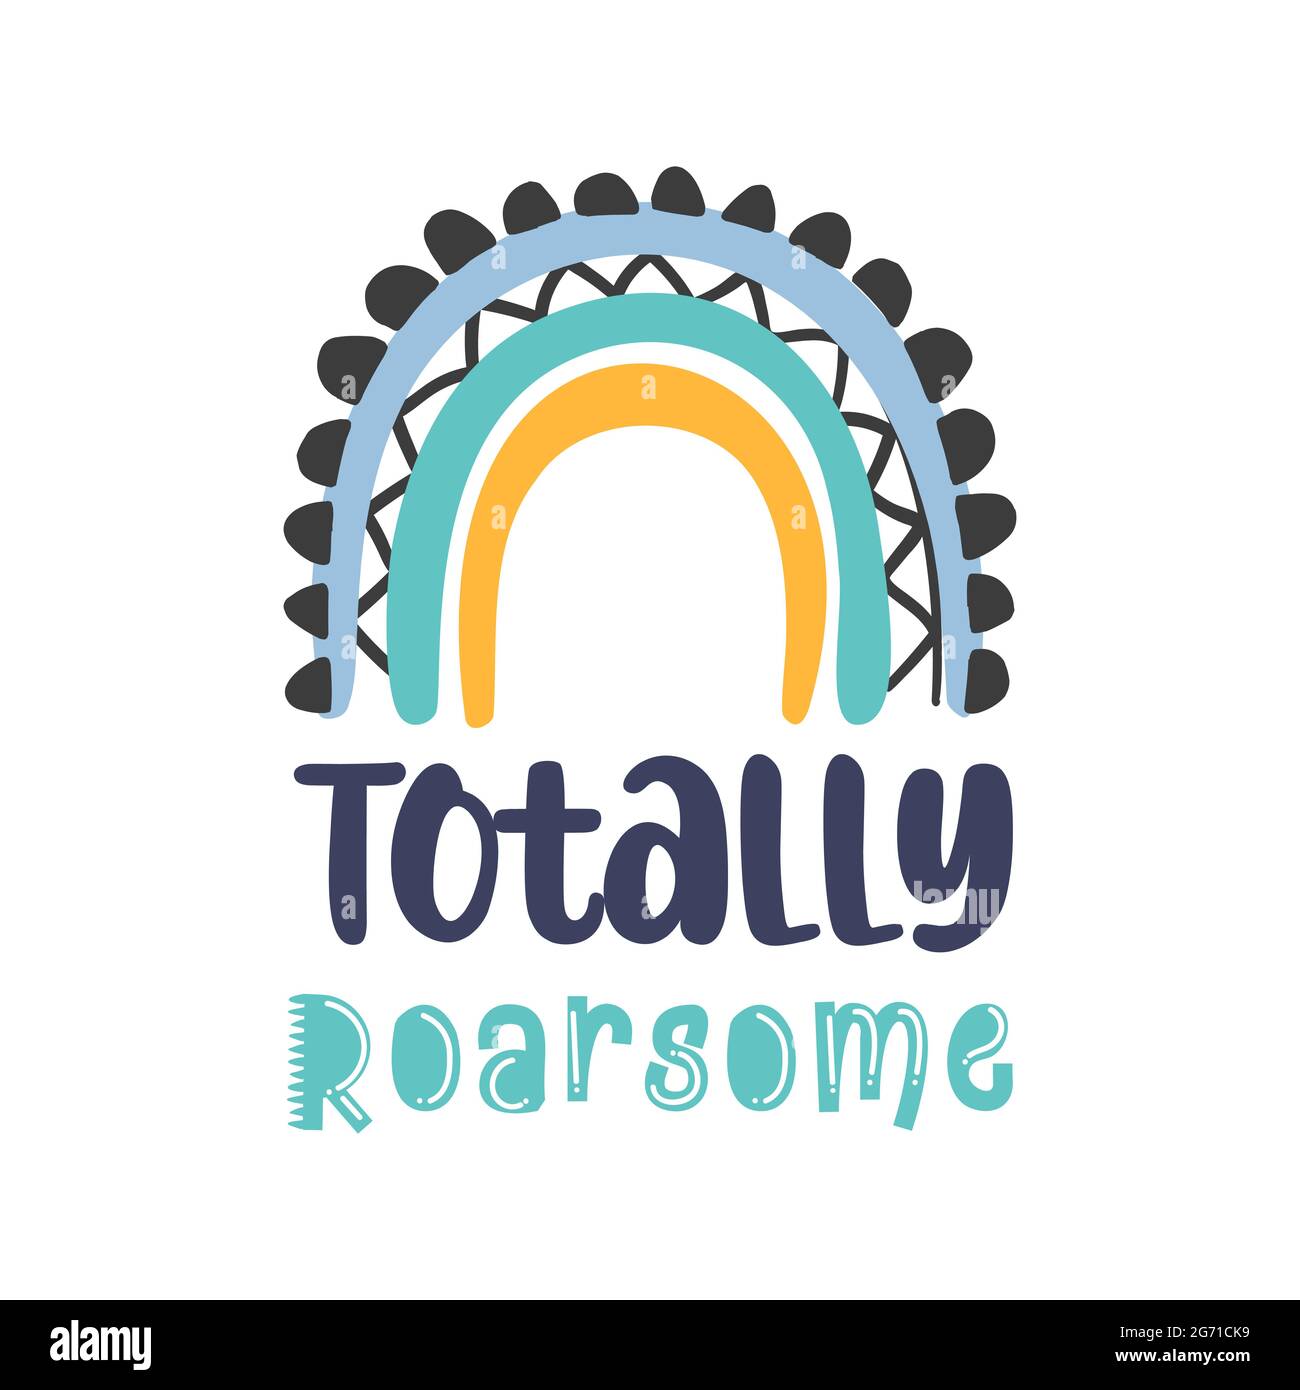 Totally roarsome dino quote with rainbow. Vector illustration